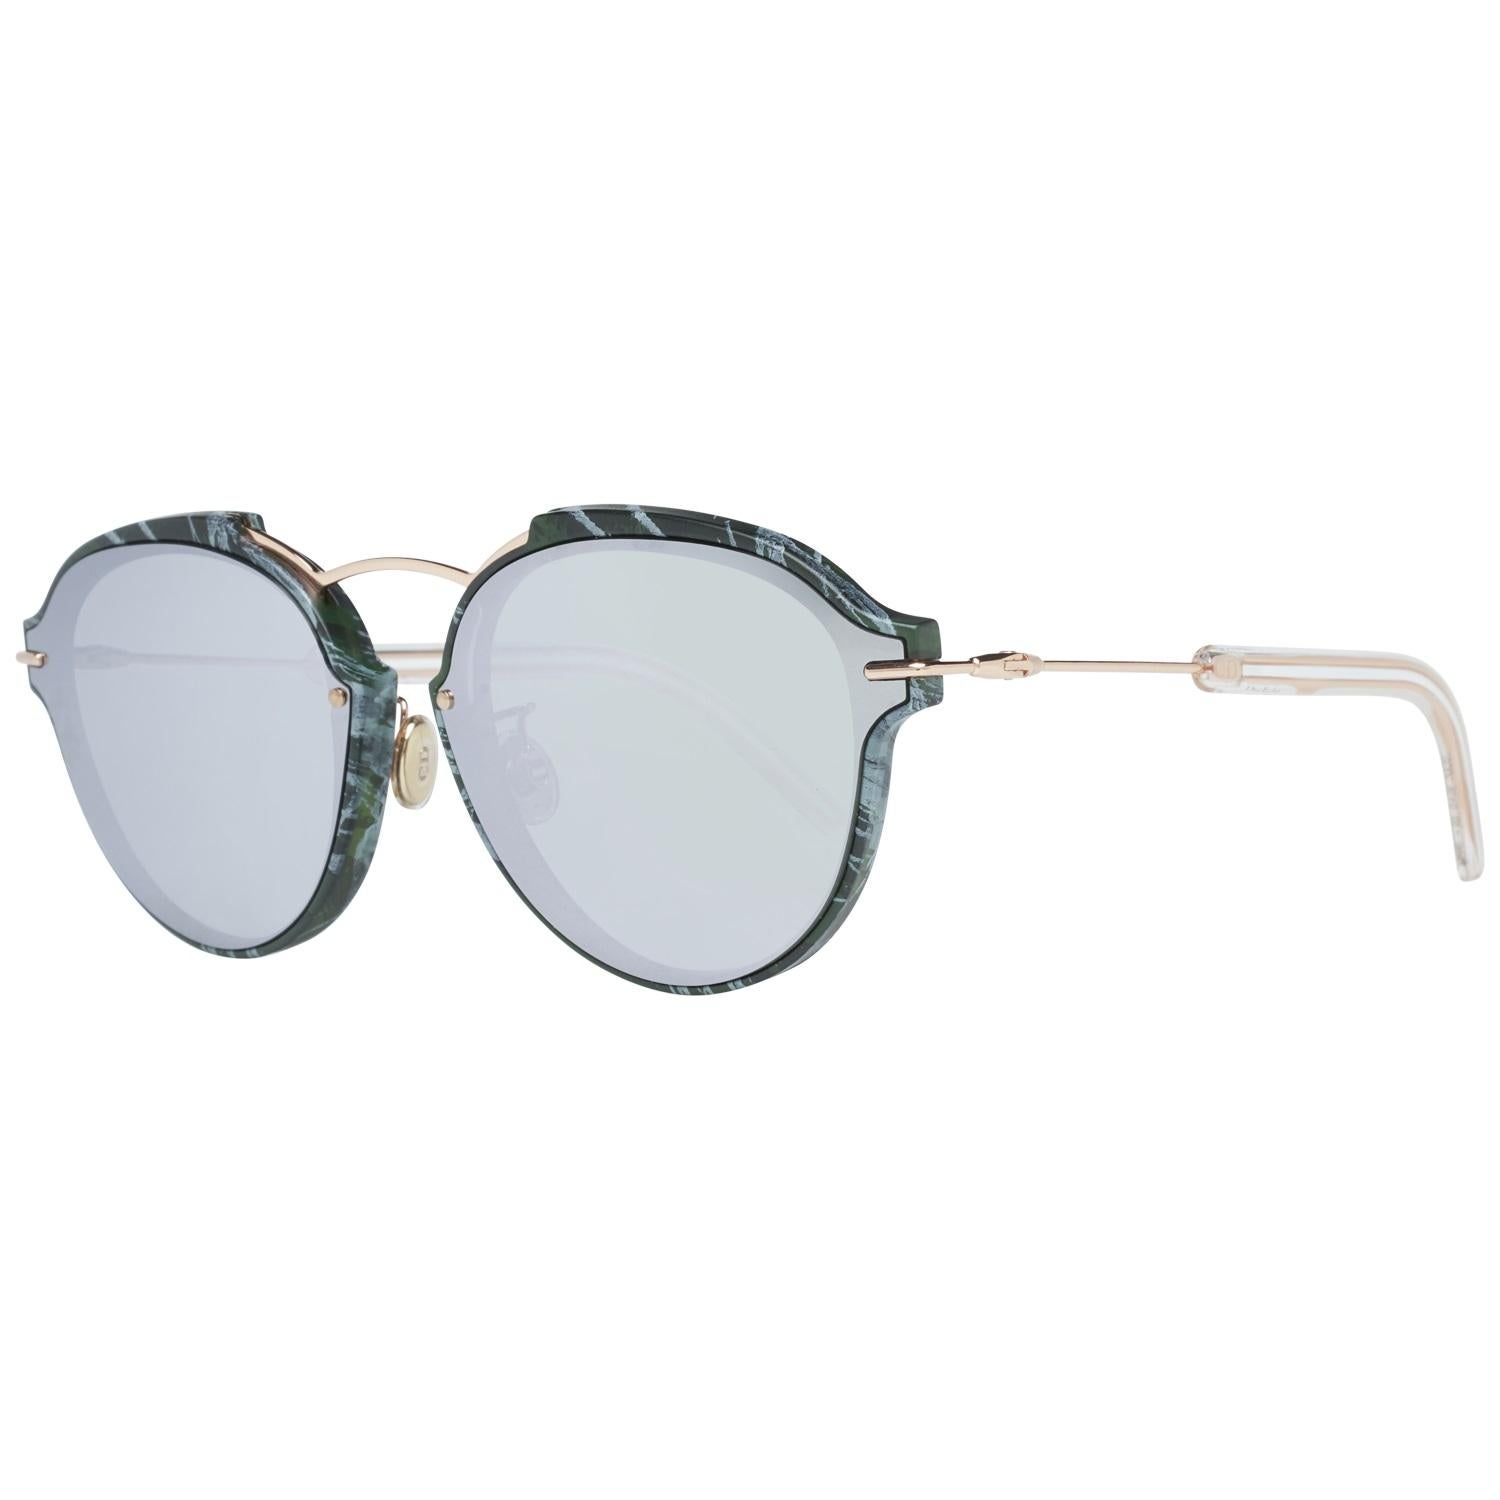 Details

MATERIAL: Metal

COLOR: Gold

MODEL: DIORECLAT 60GC1

GENDER: Women

COUNTRY OF MANUFACTURE: Italy

TYPE: Sunglasses

ORIGINAL CASE?: Yes

STYLE: Round

OCCASION: Casual

FEATURES: Lightweight

LENS COLOR: Silver

LENS TECHNOLOGY: